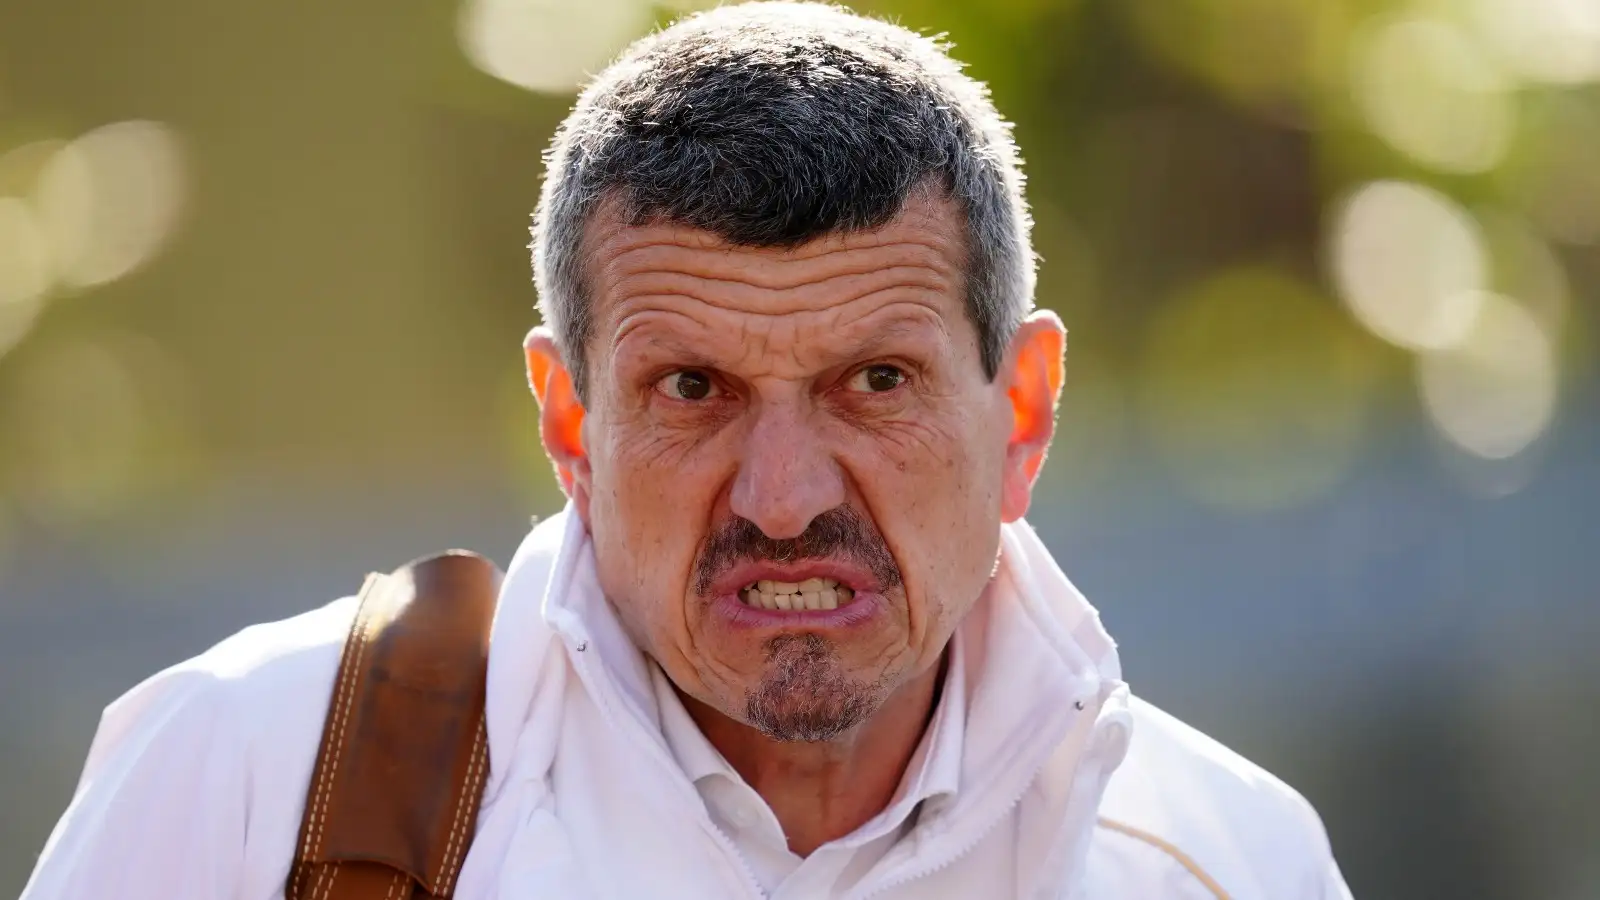 Haas team boss Guenther Steiner with a funny expression. Italy, April 2022.